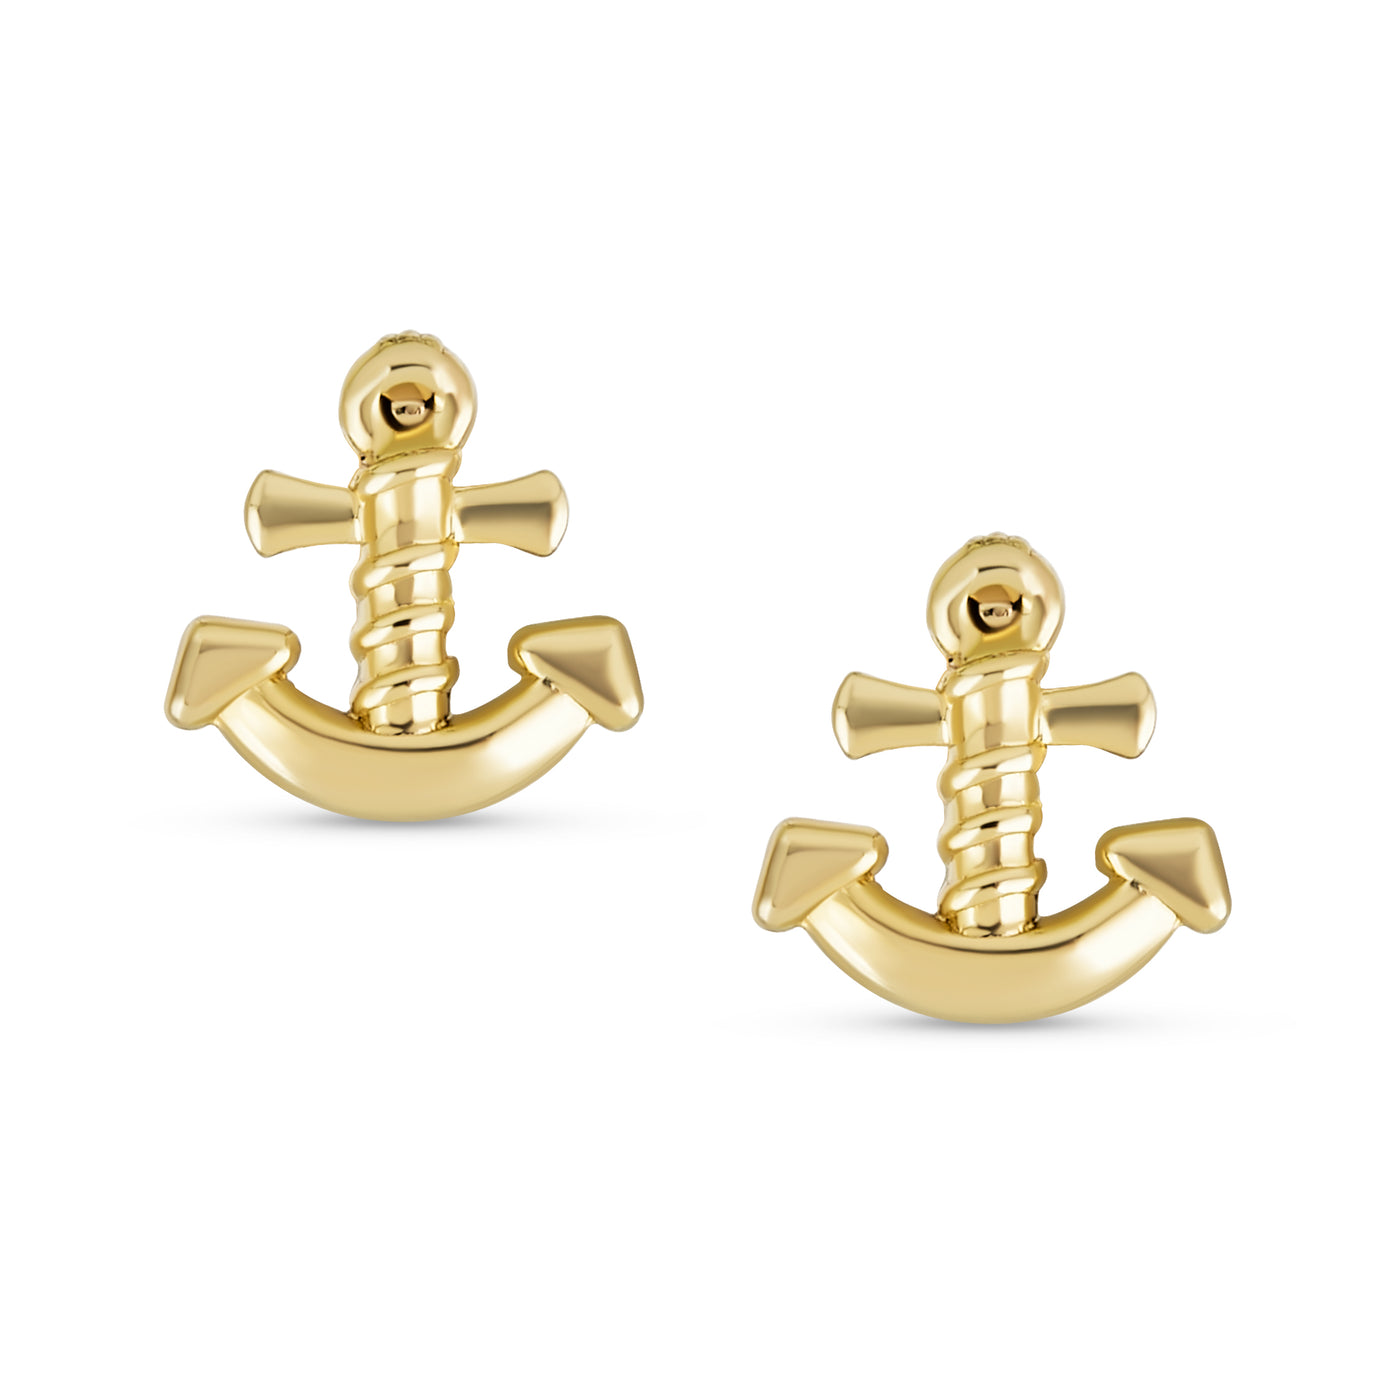 Small Nautical Anchor Stud Earrings Genuine 14K Yellow Gold Screw Back